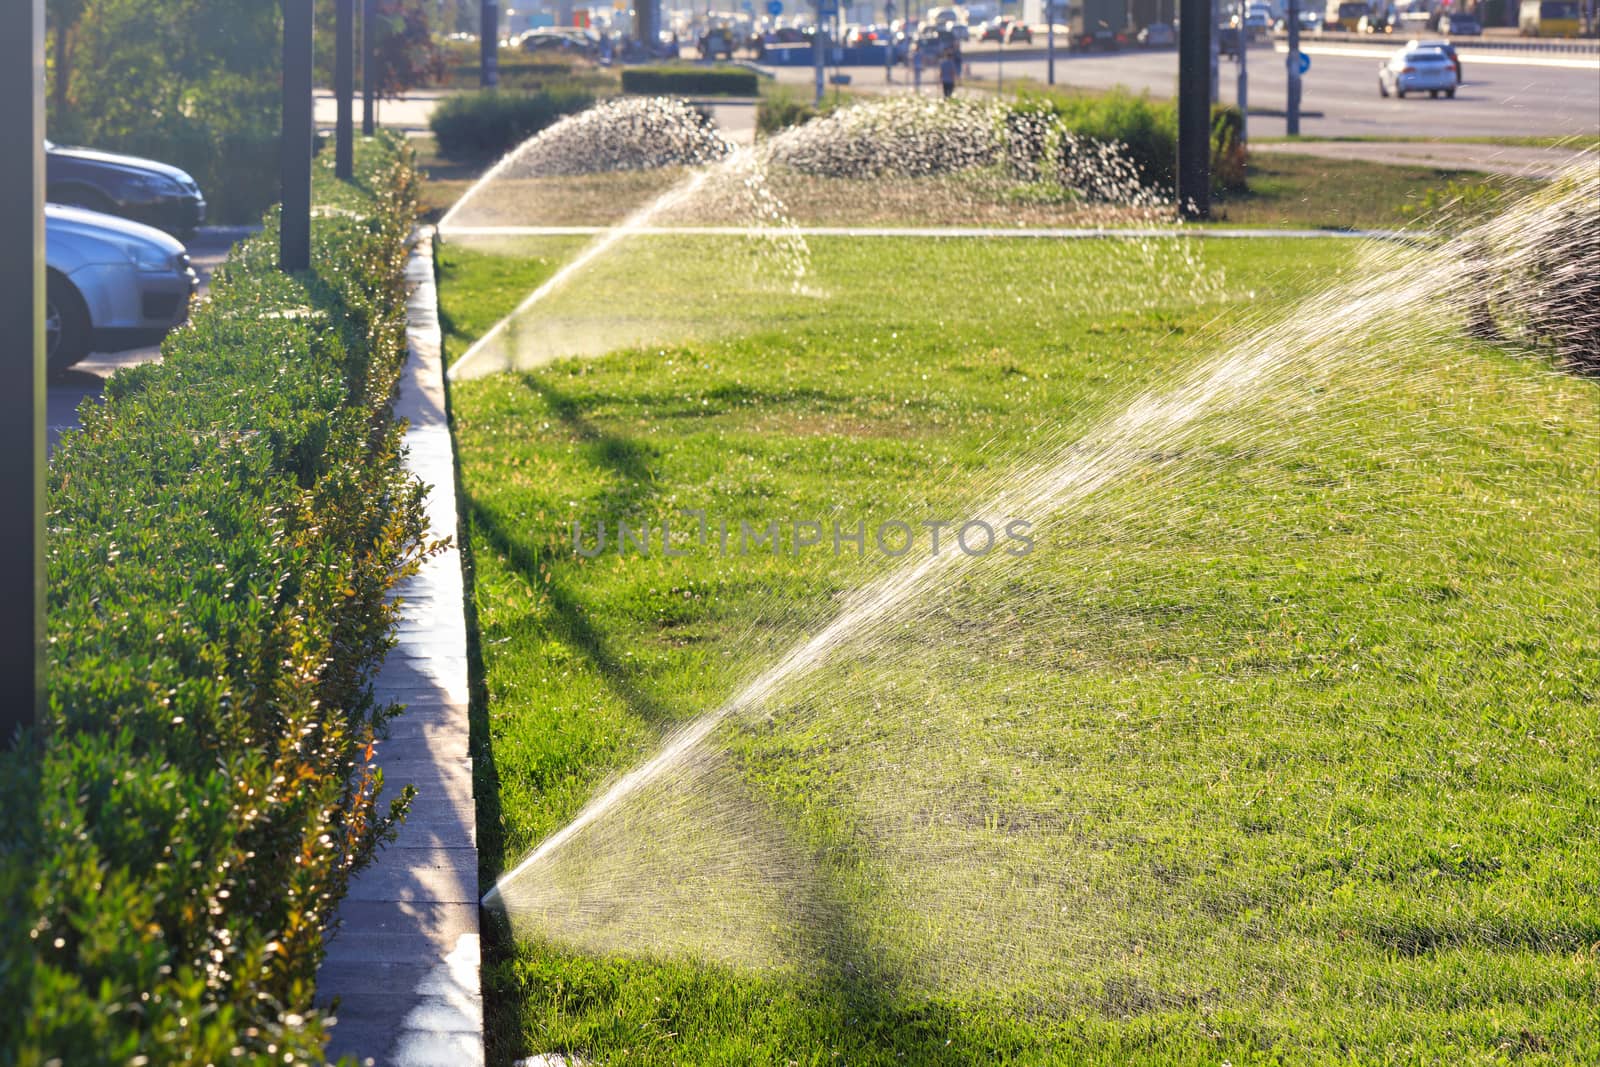 An automatic sprinkler system sprays the green lawn on a bright sunny day. by Sergii